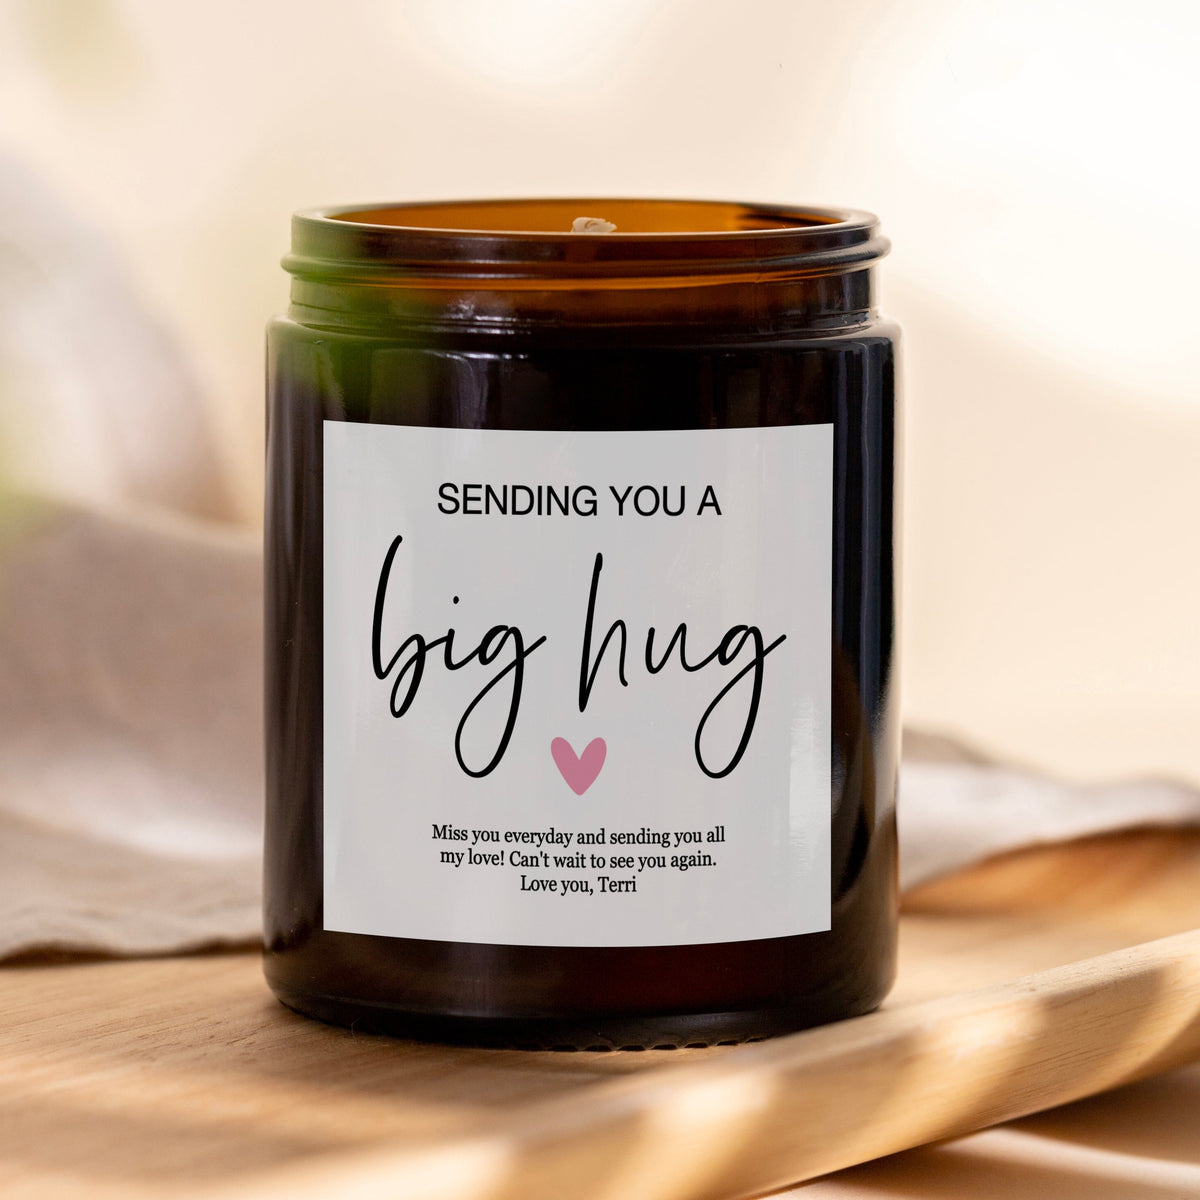 Big Hug Personalised Scented Apothecary Candle